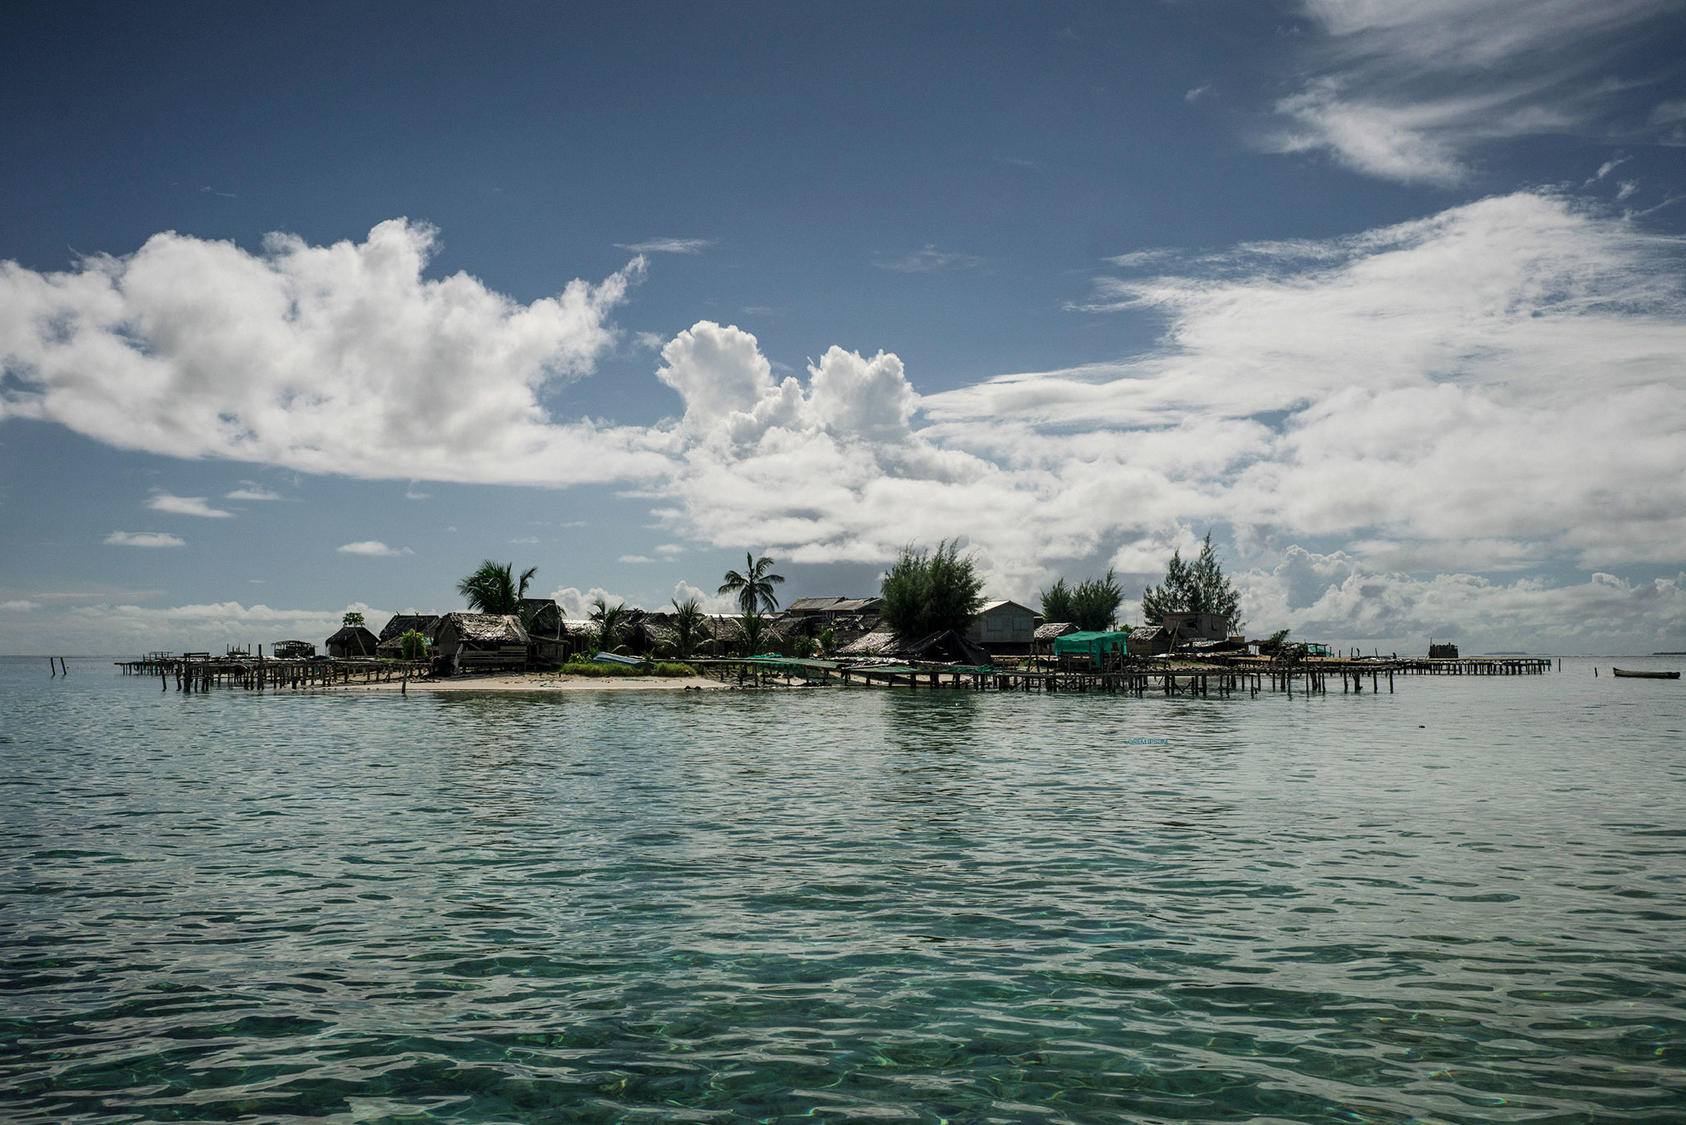 Beniamina Island, part of the Solomon Islands, June 6, 2018. A security agreement between the island nation and China has resulted in “intensifying” U.S. engagement in the Pacific Islands region. (Adam Ferguson/The New York Times)